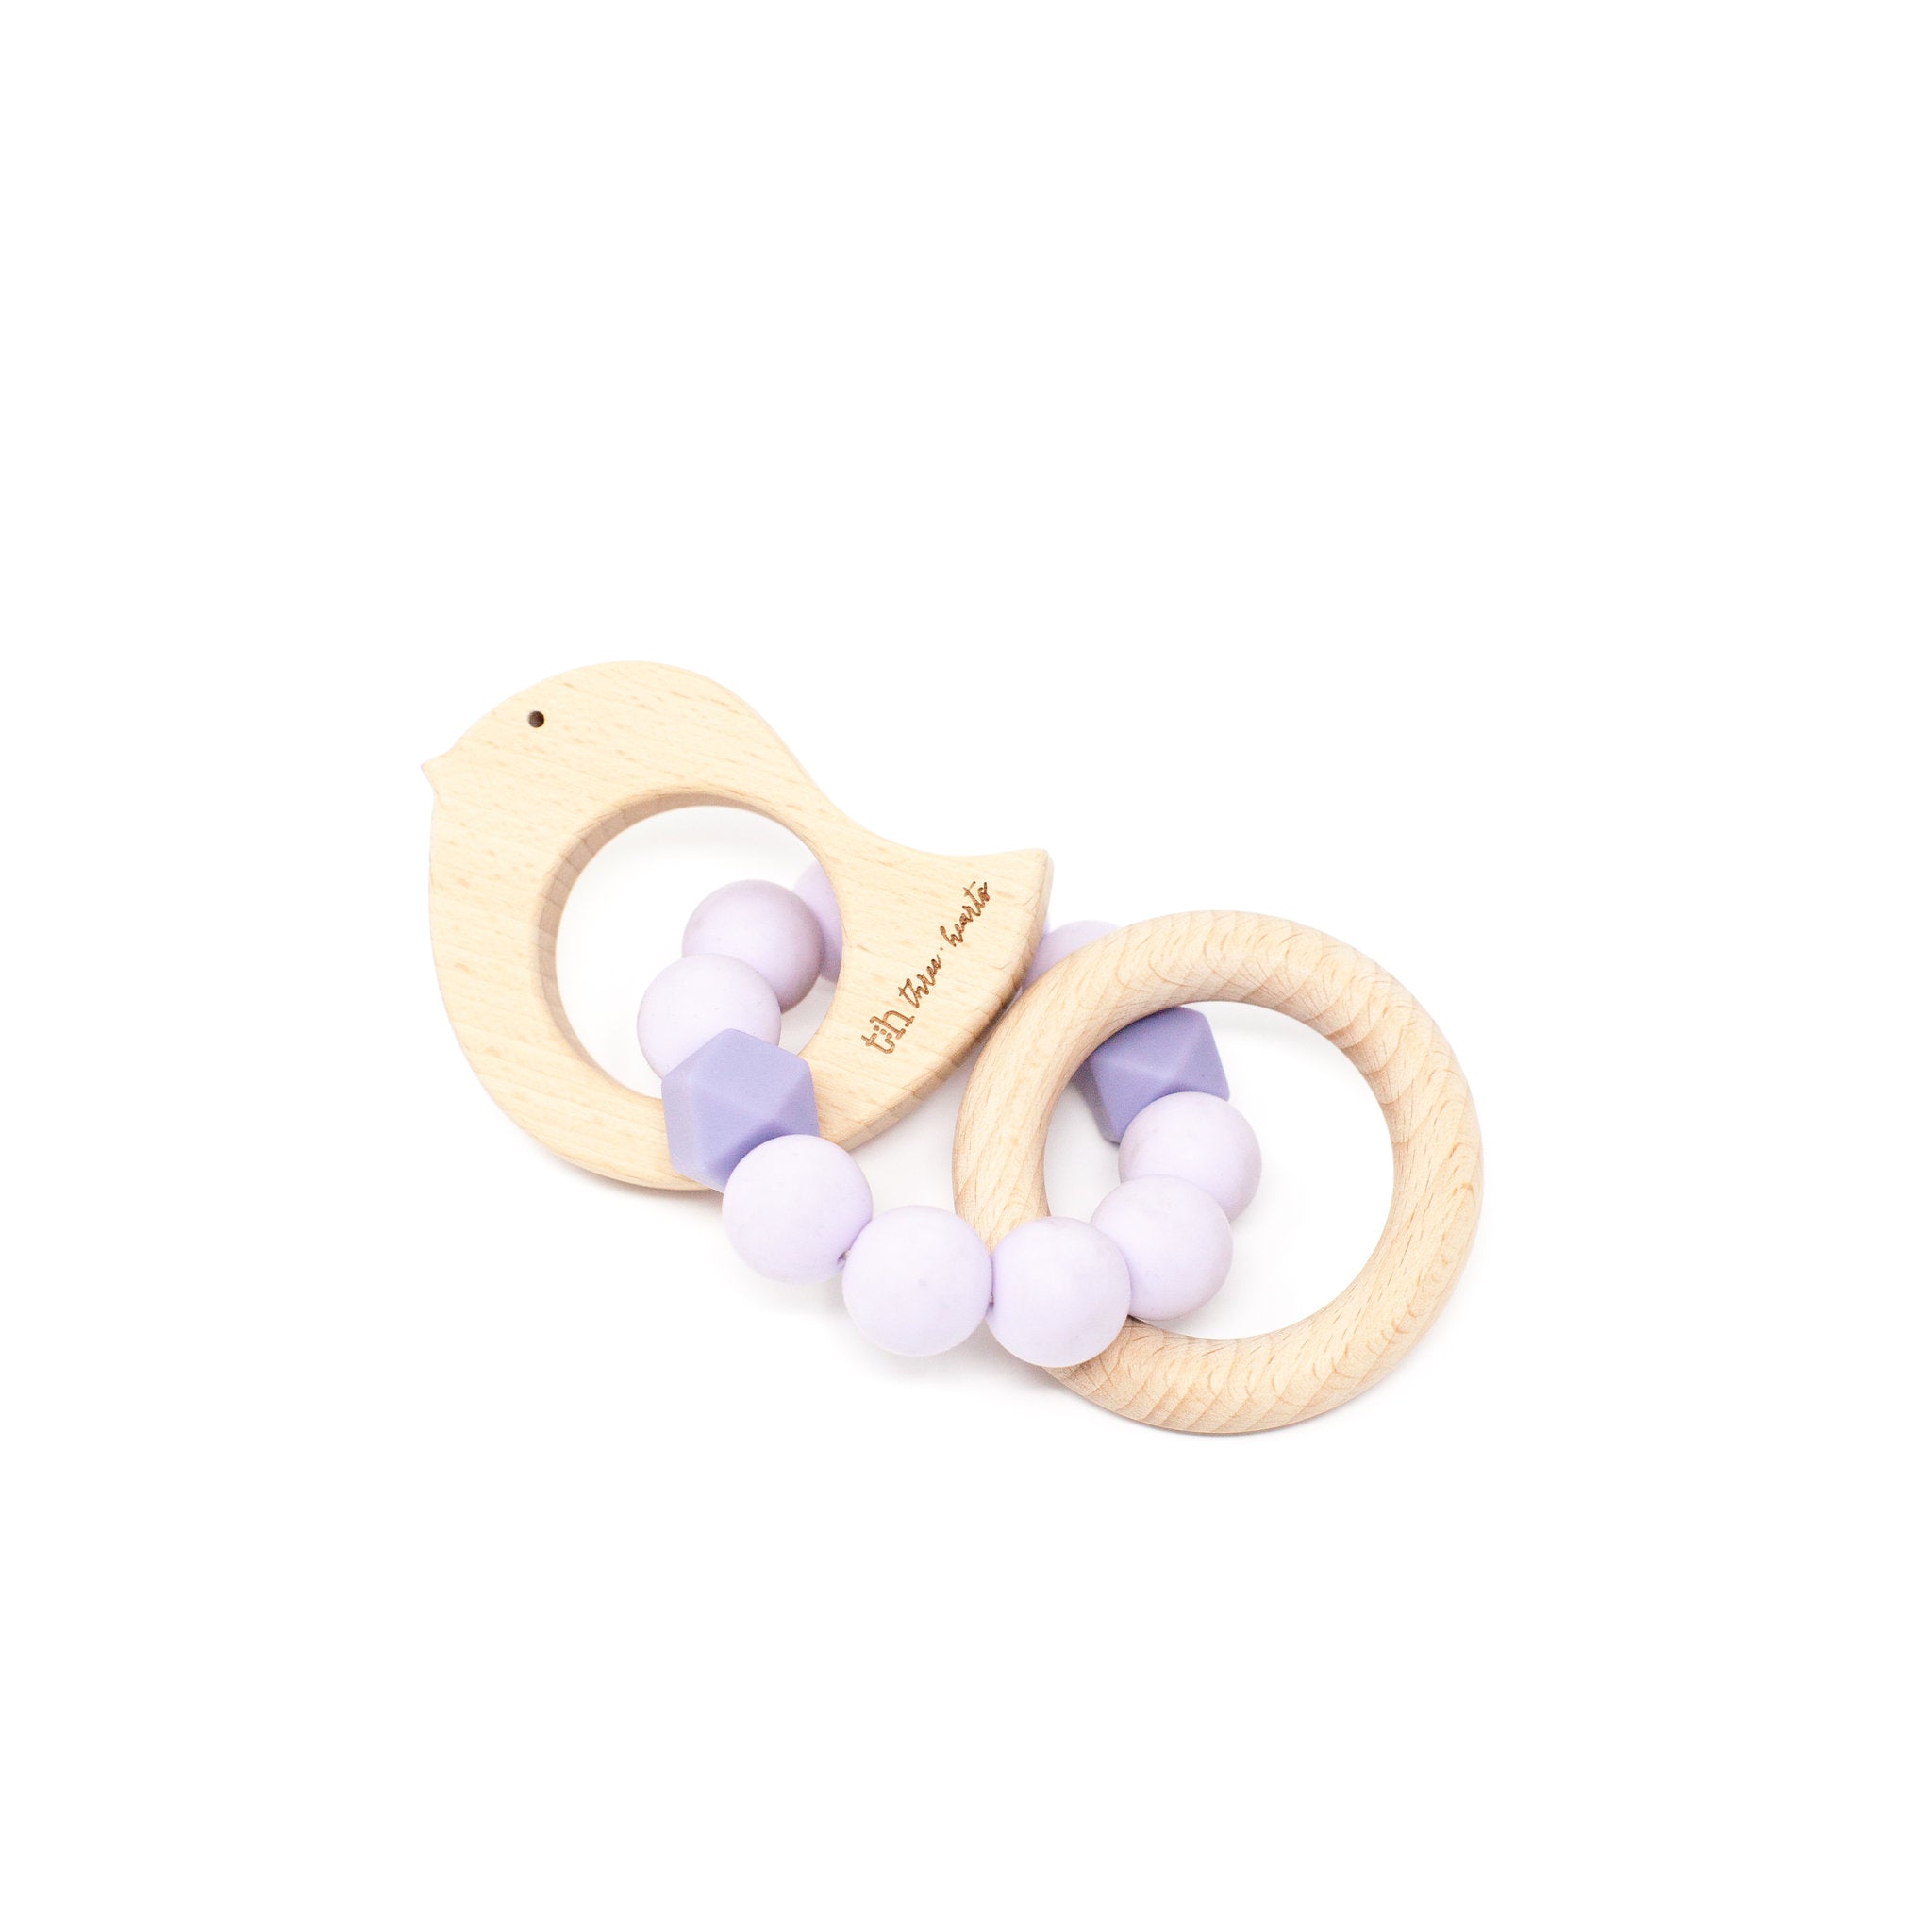 Dove Rattle - BPA Free Silicone & Beech Wood